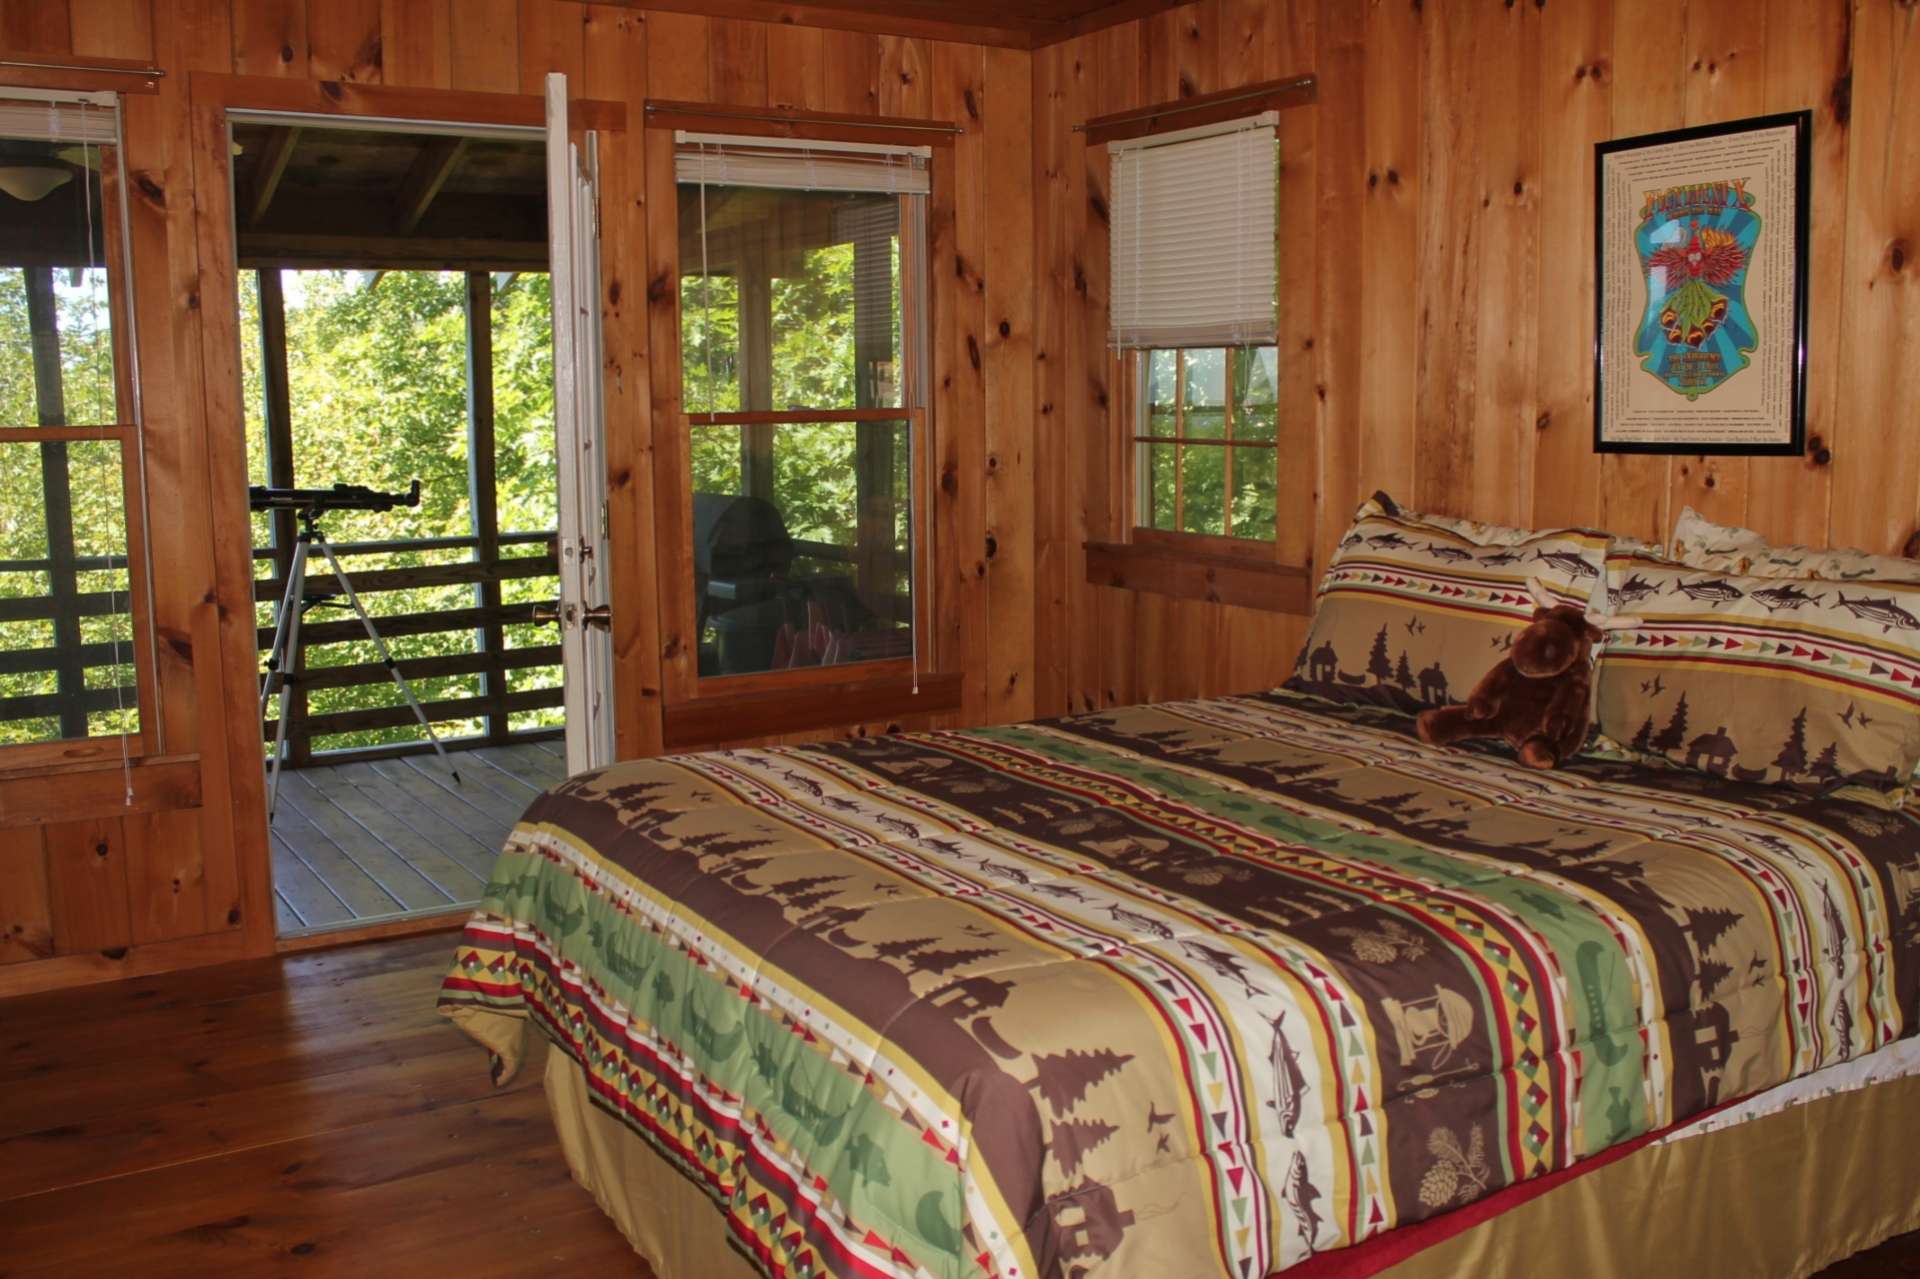 The owner's suite is conveniently located on the main level and offers private access to the screened porch.